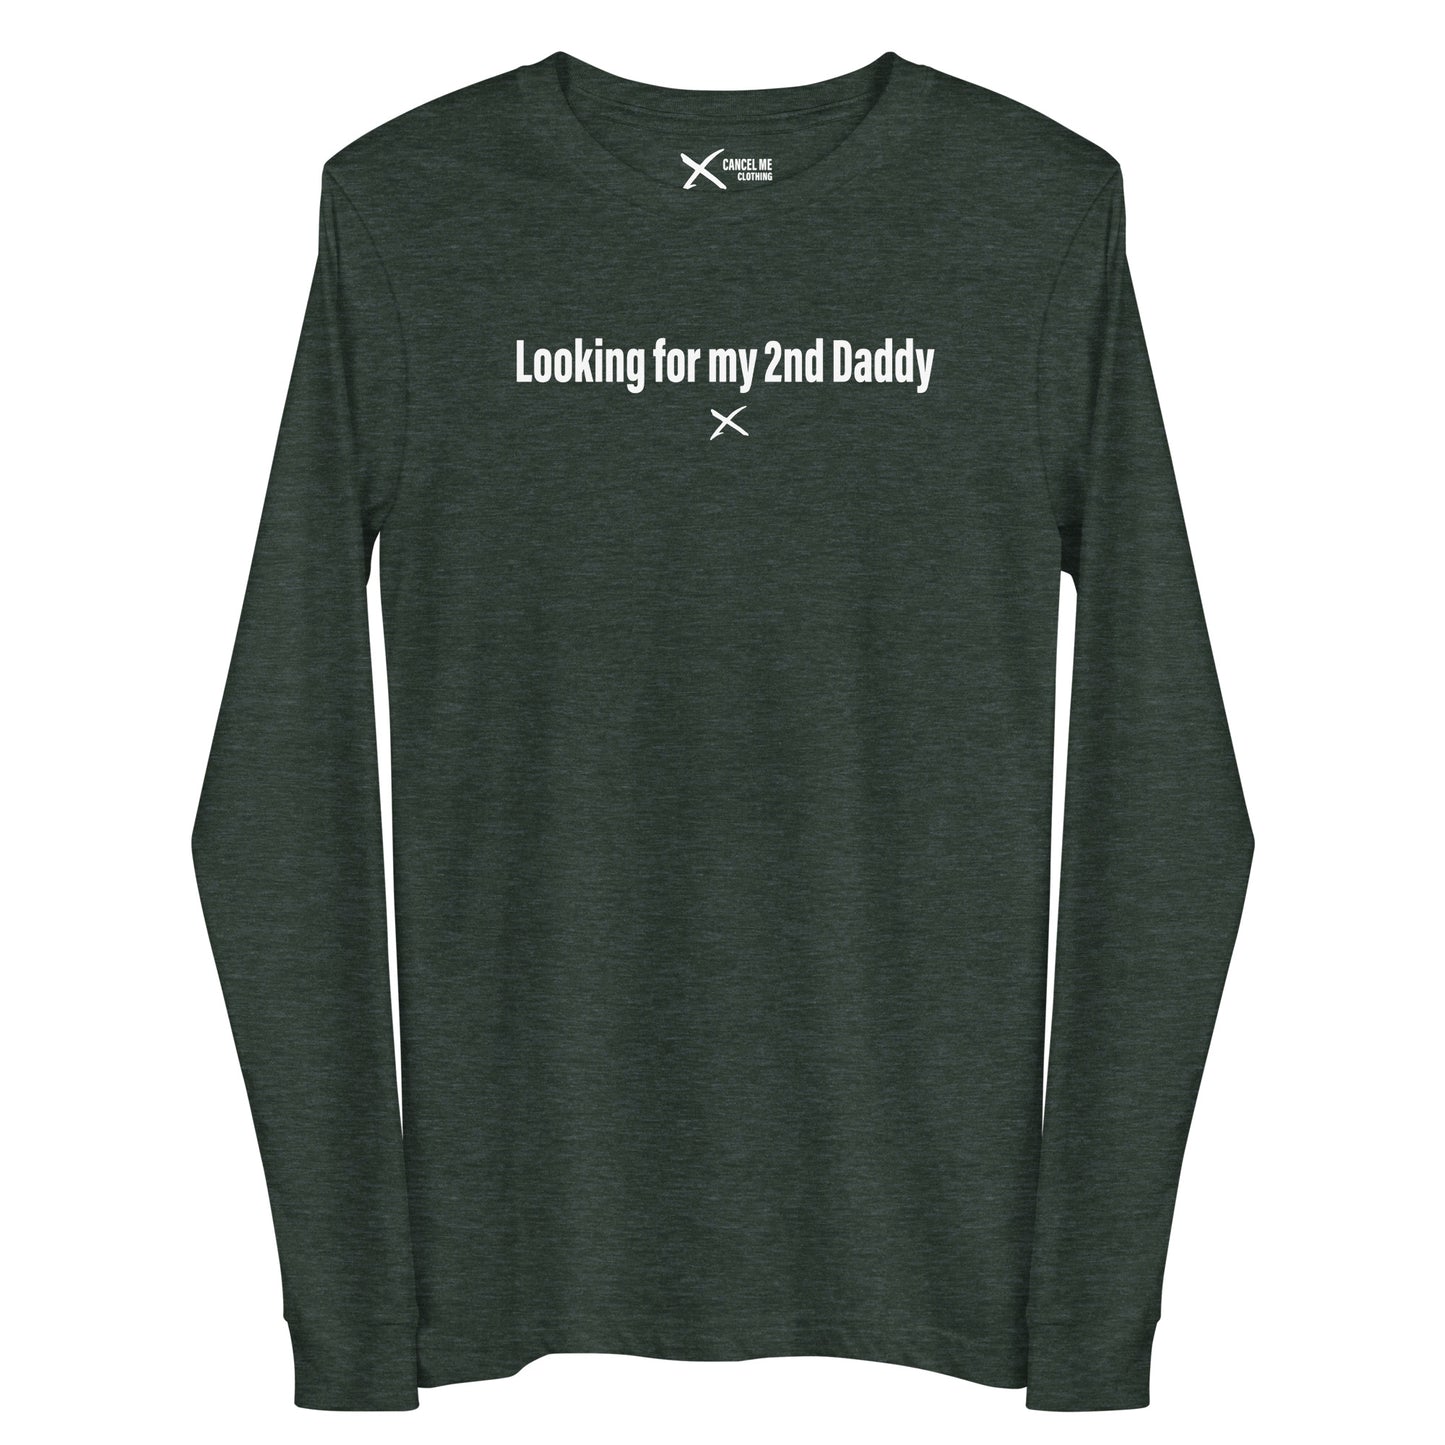 Looking for my 2nd Daddy - Longsleeve